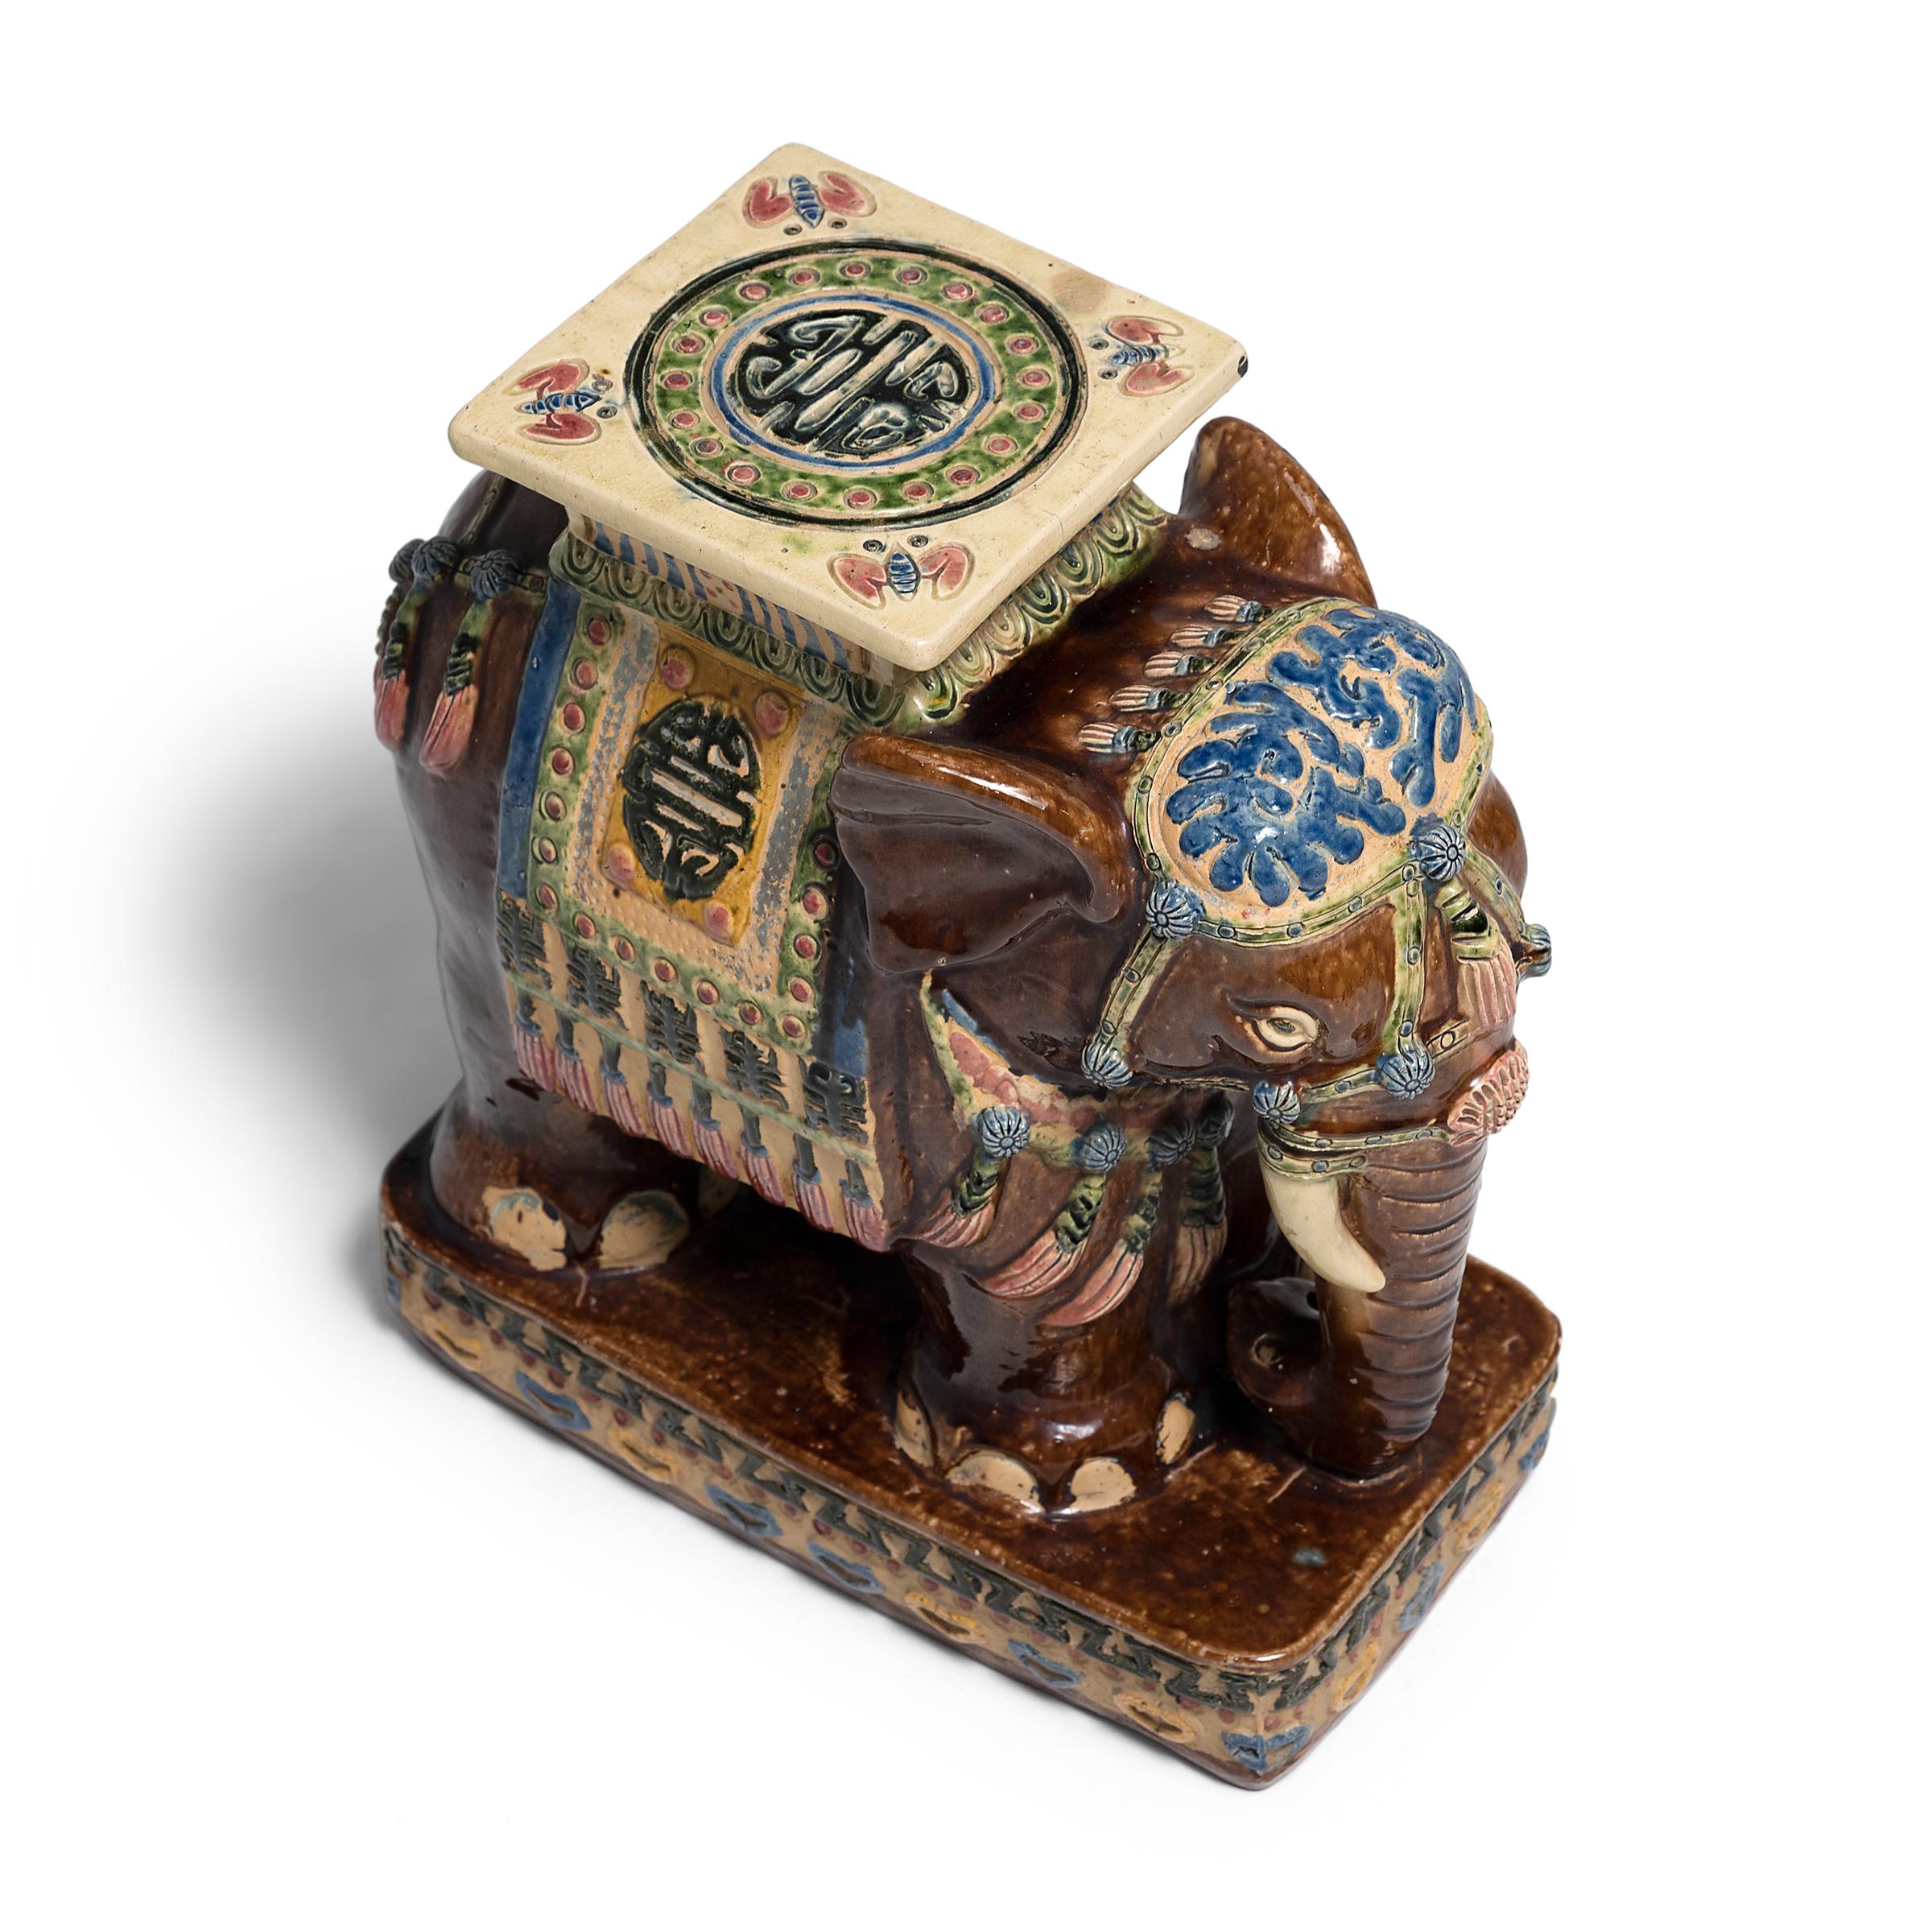 Glazed in a loose, free drip style that recalls ancient sancai ware, this colorful ceramic garden stool charms with a dark brown glaze accented with bold blues, greens, and yellows. Sculpted in the shape of an elephant, the seat blends both form and